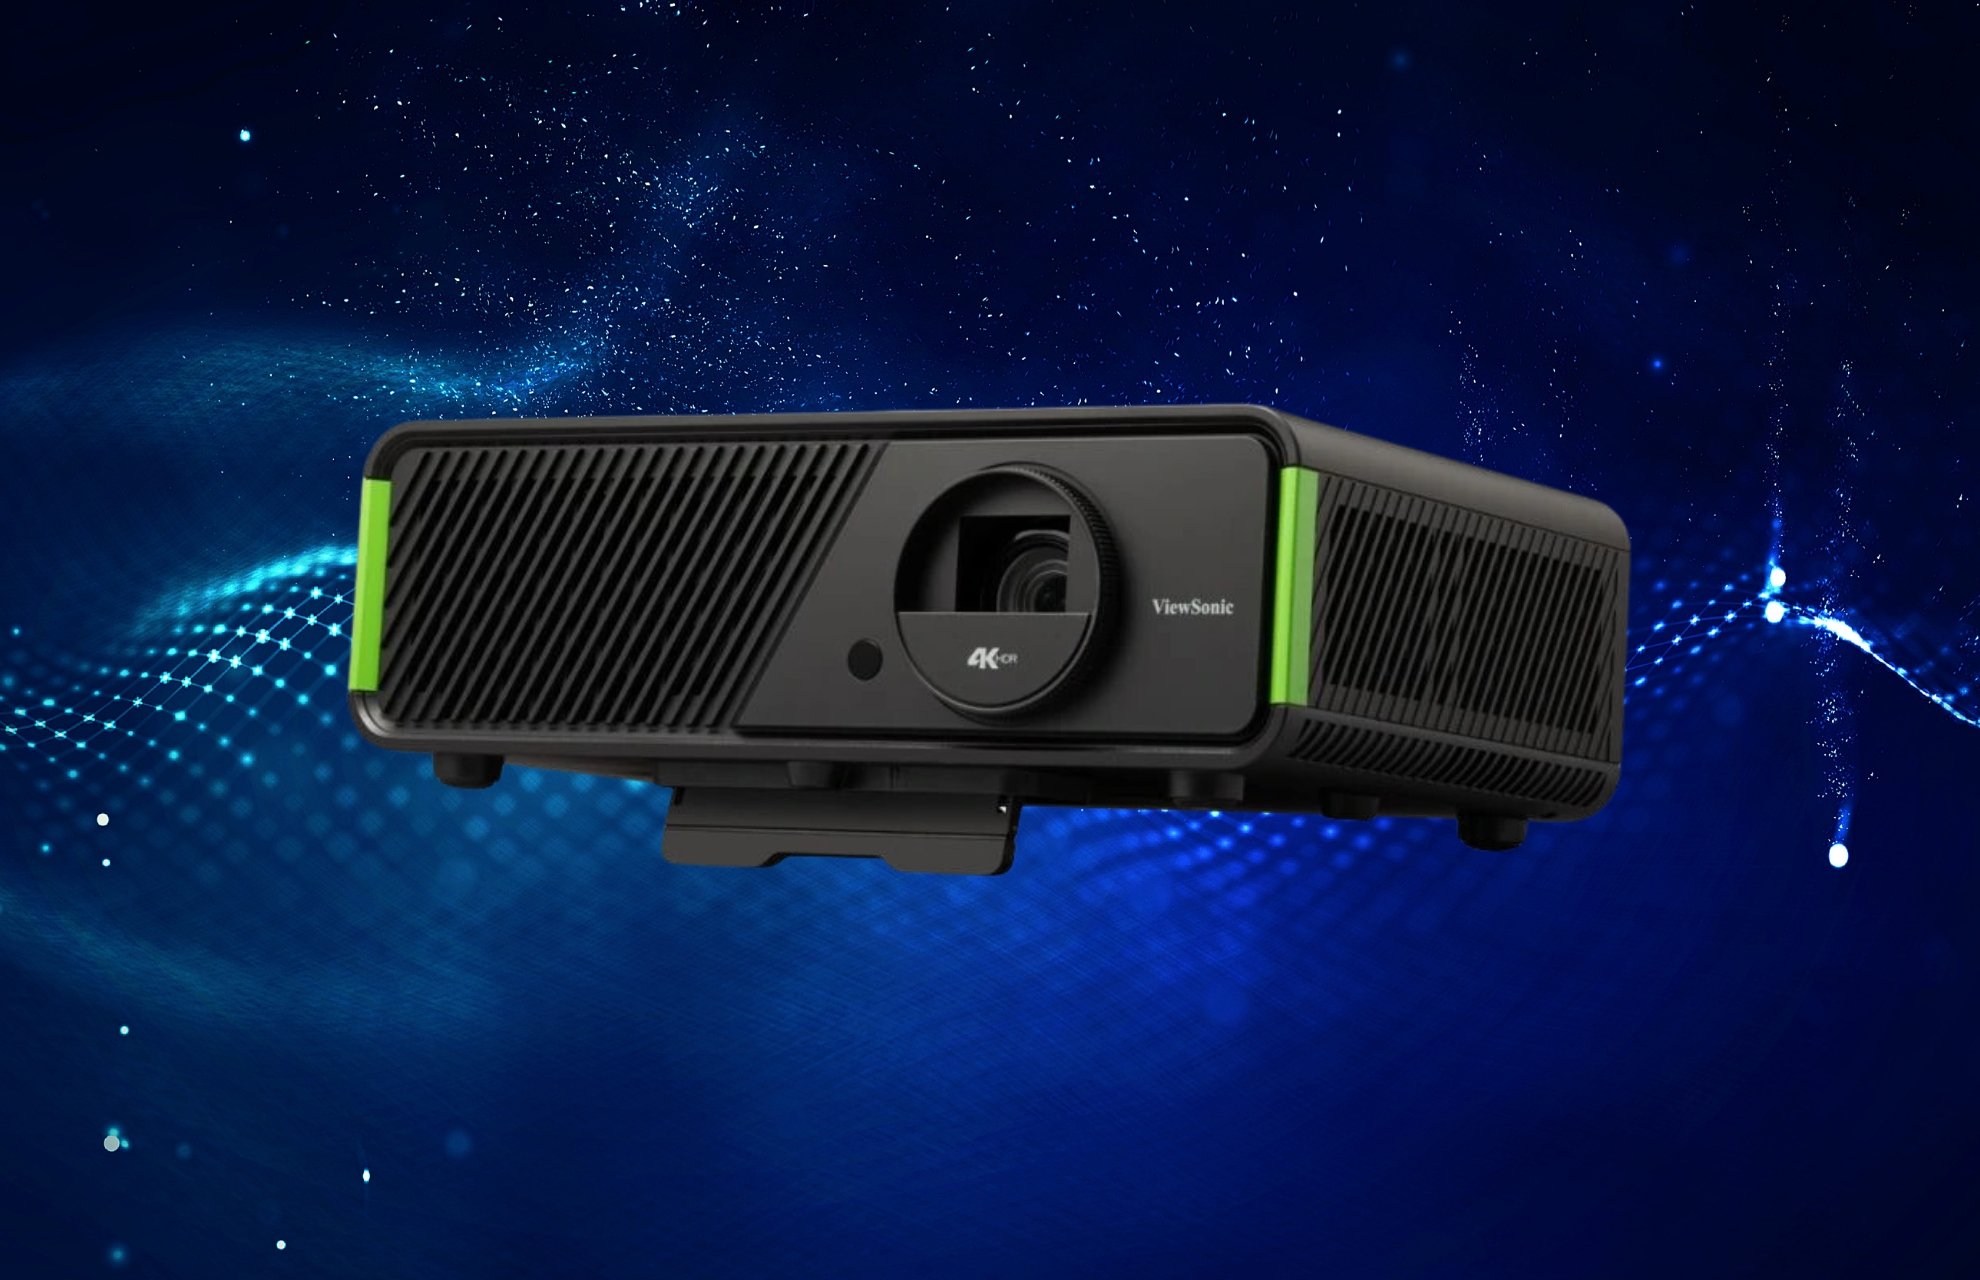 X1-4K Xbox Projector made by ViewSonic